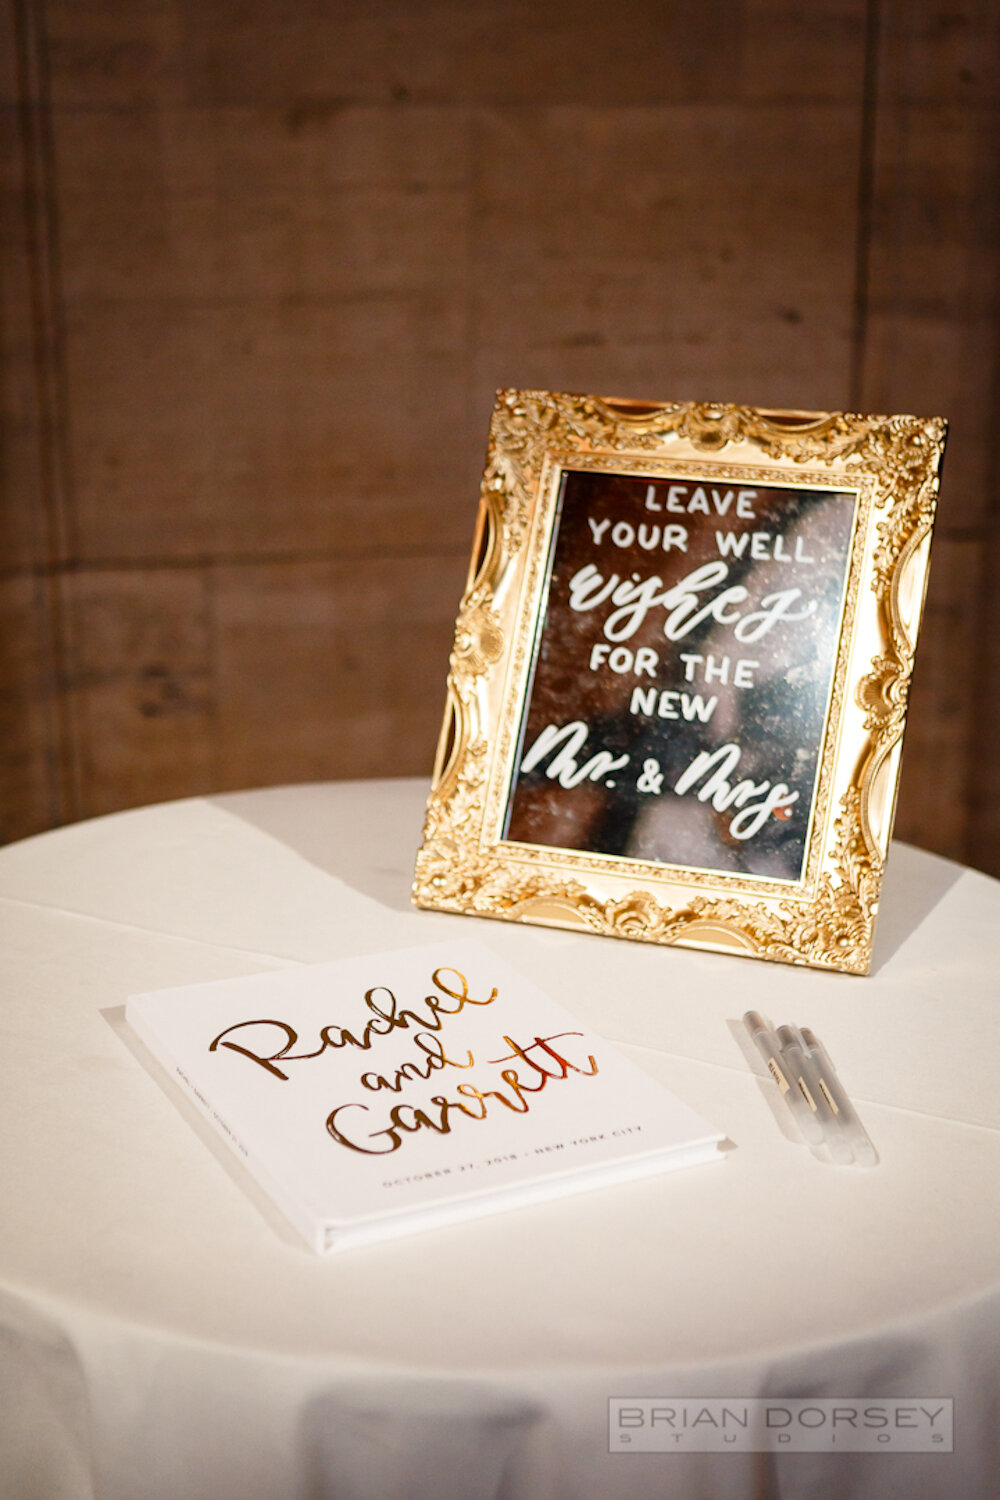 Cipriani wedding guest book and mirror sign